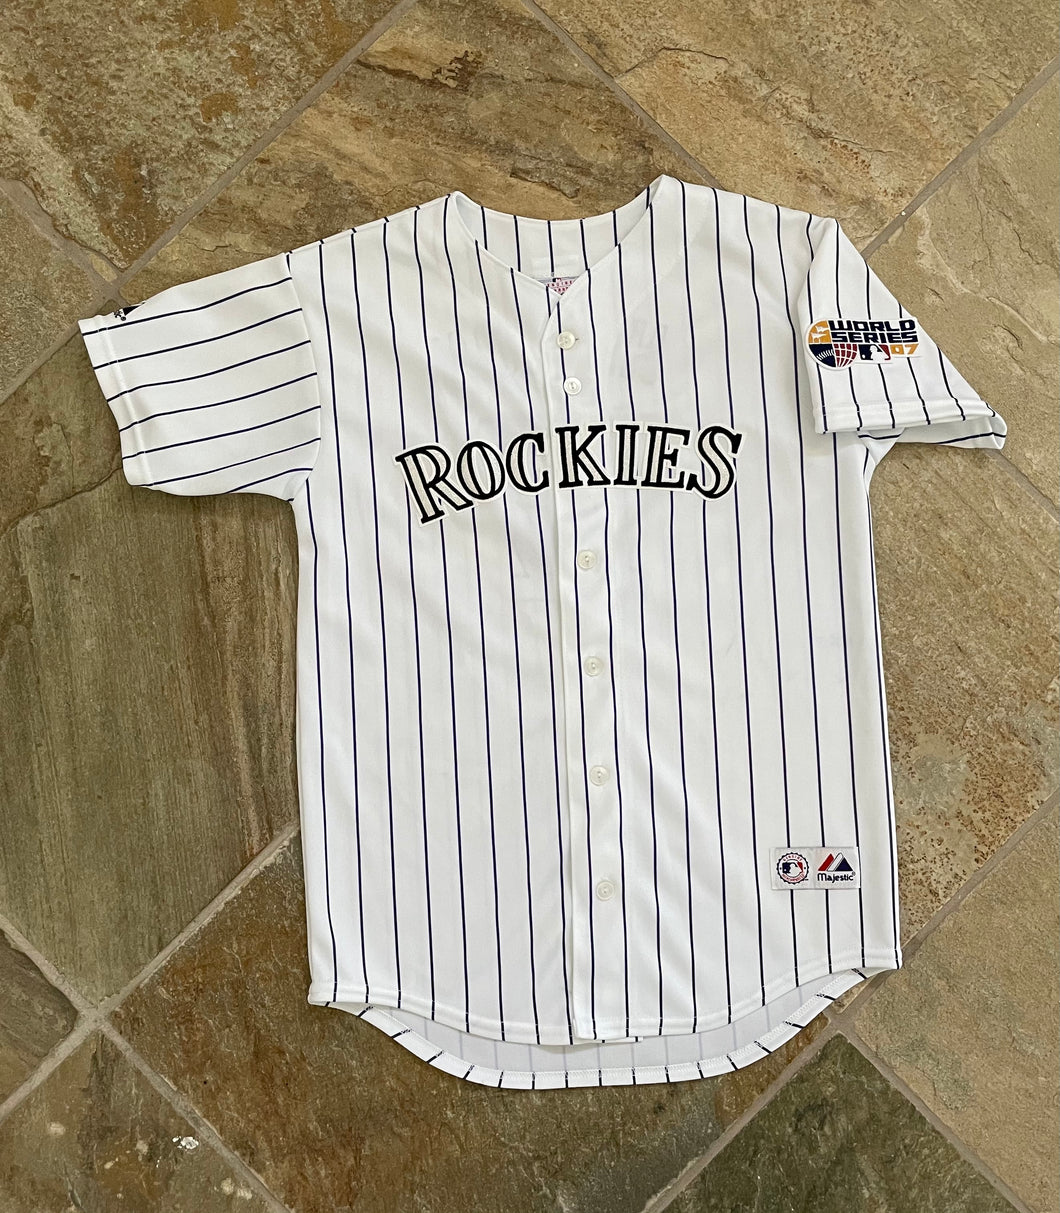 Todd Helton #17 Colorado Rockies Jersey Size 52 Authentic Majestic Gray  Striped